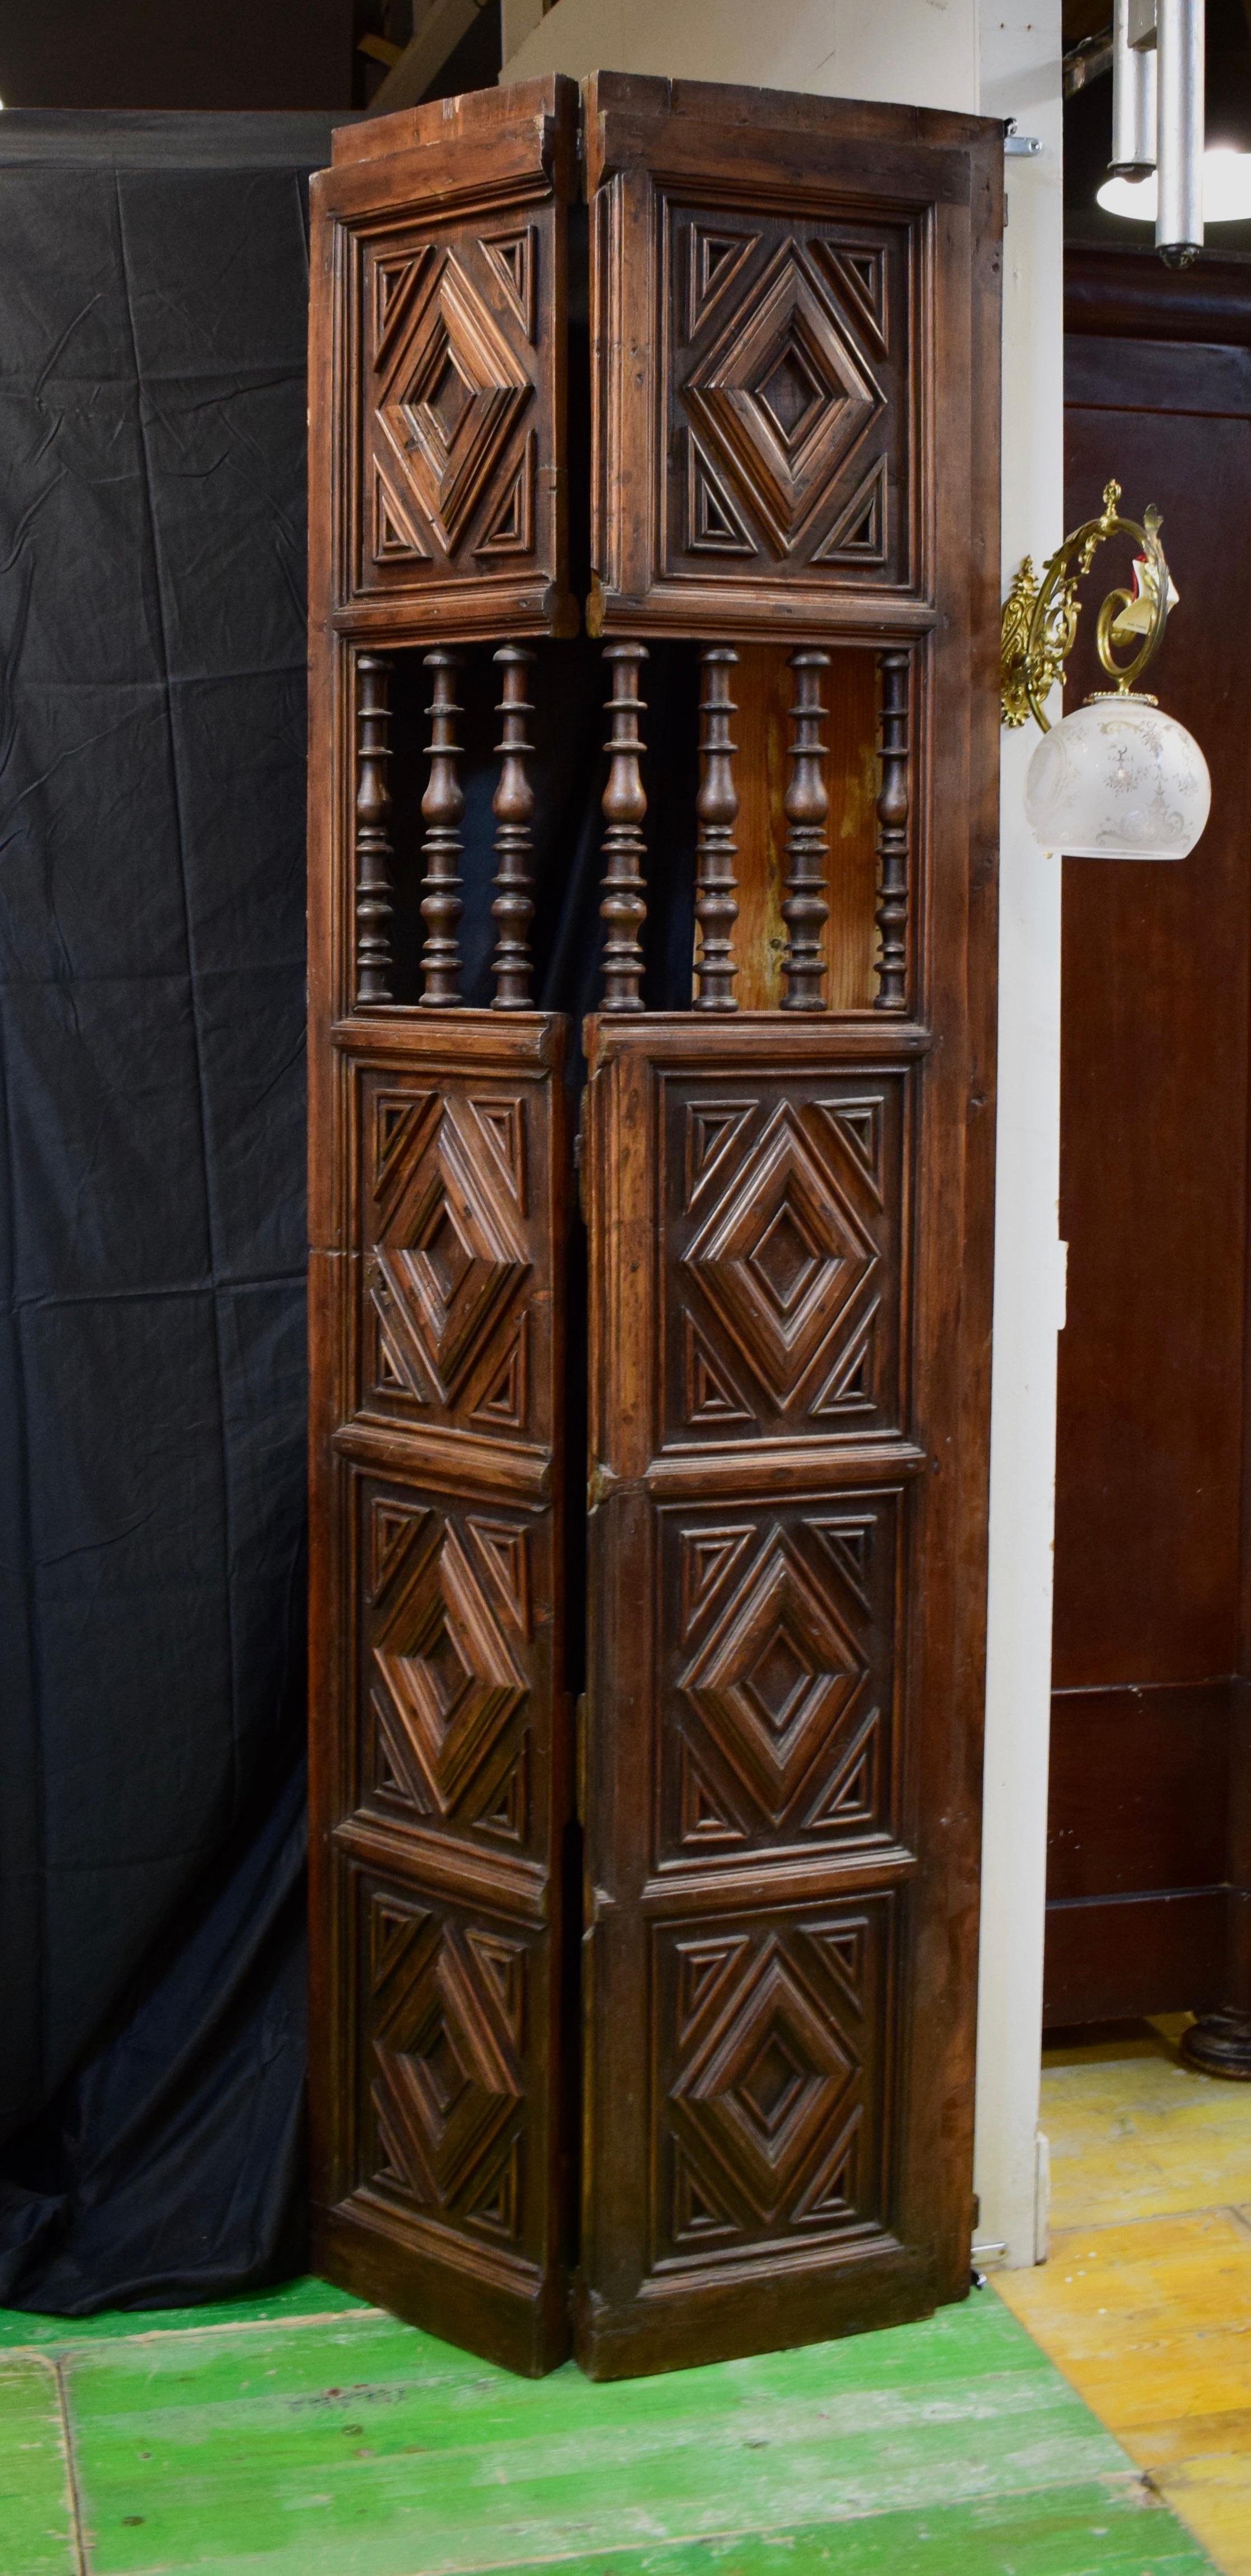 A pair of Spanish Colonial mesquite solid wood doors from the 19th century. The doors still retain their original locks and hinges. They are all functional. Each door has five panels, four recessed panels have a diamond pattern carved into the wood,